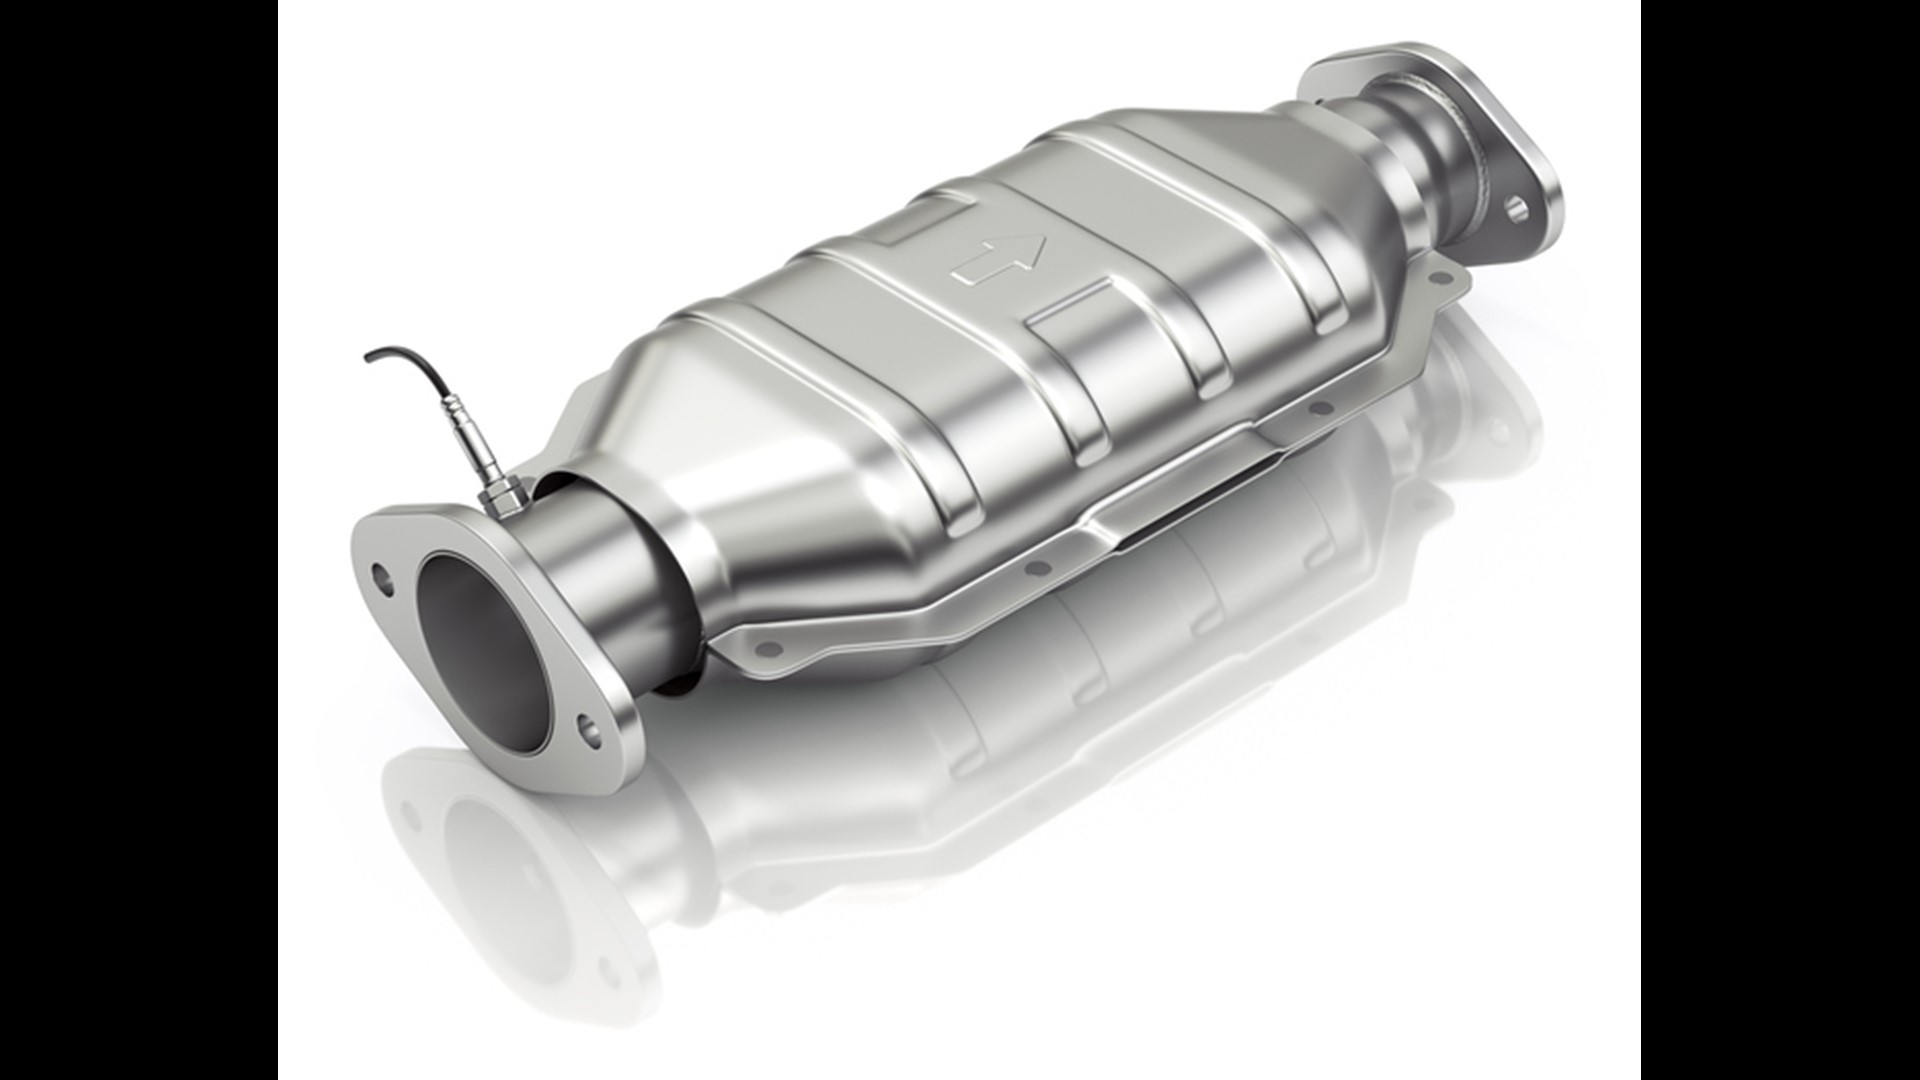 With catalytic converter thefts on the rise in Northern California over the past year, is the pandemic to blame? We verify.